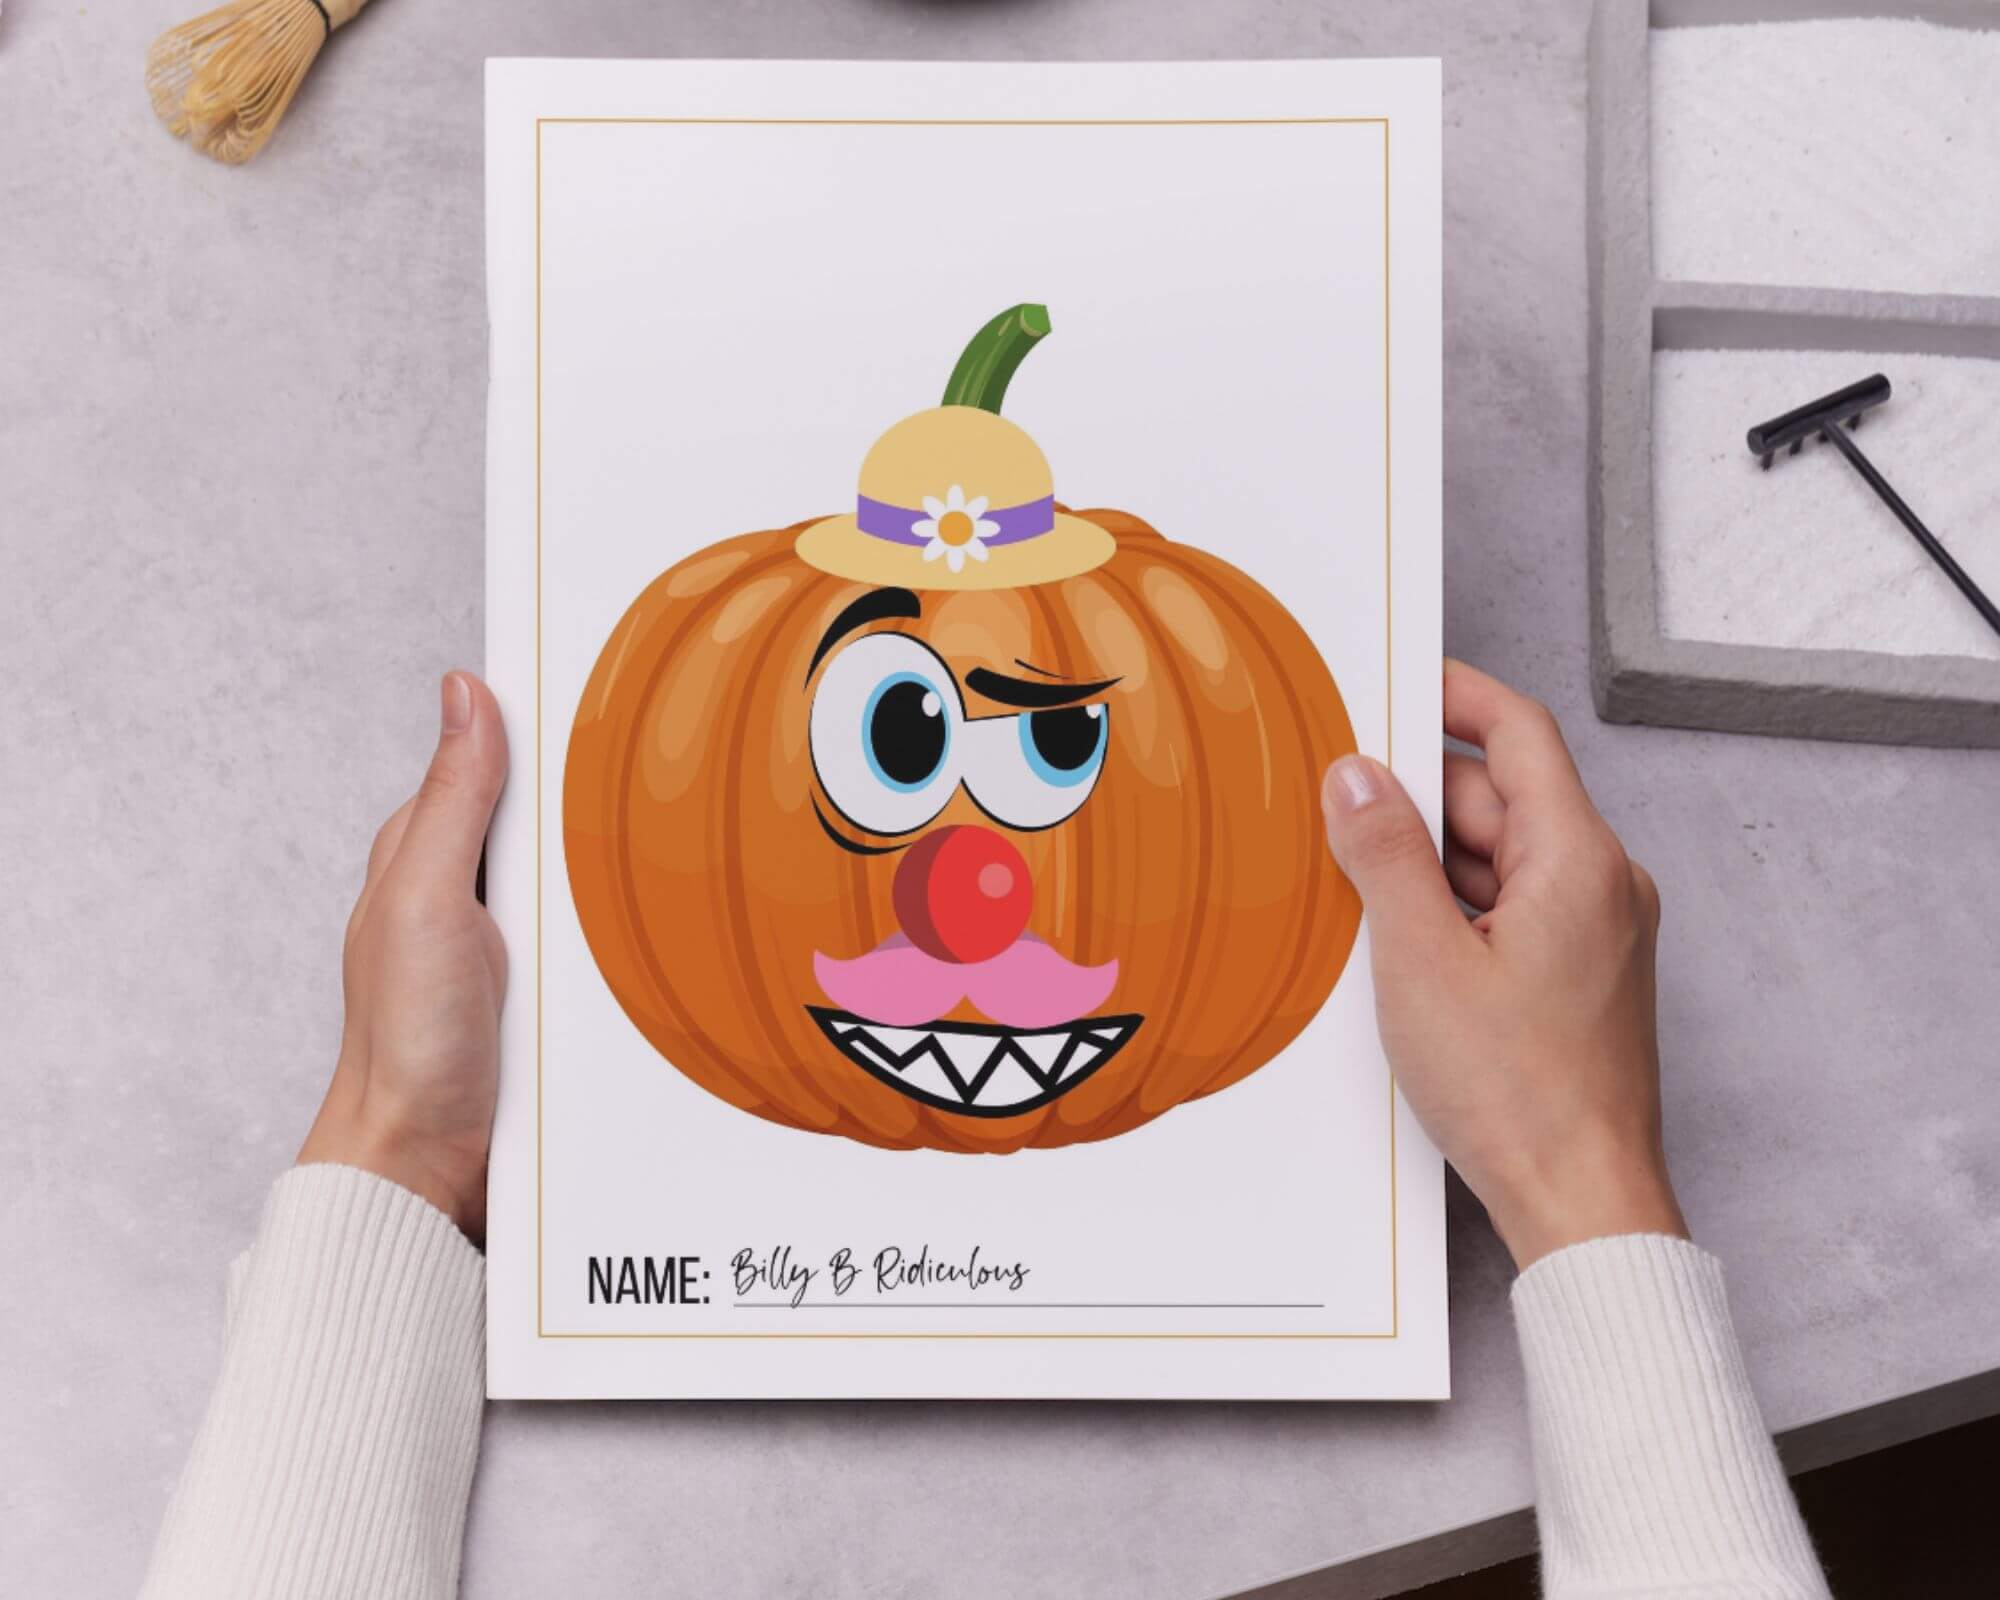 Image of a person holding a piece of paper with a printed pumpkin that has funny facial features stuck on.